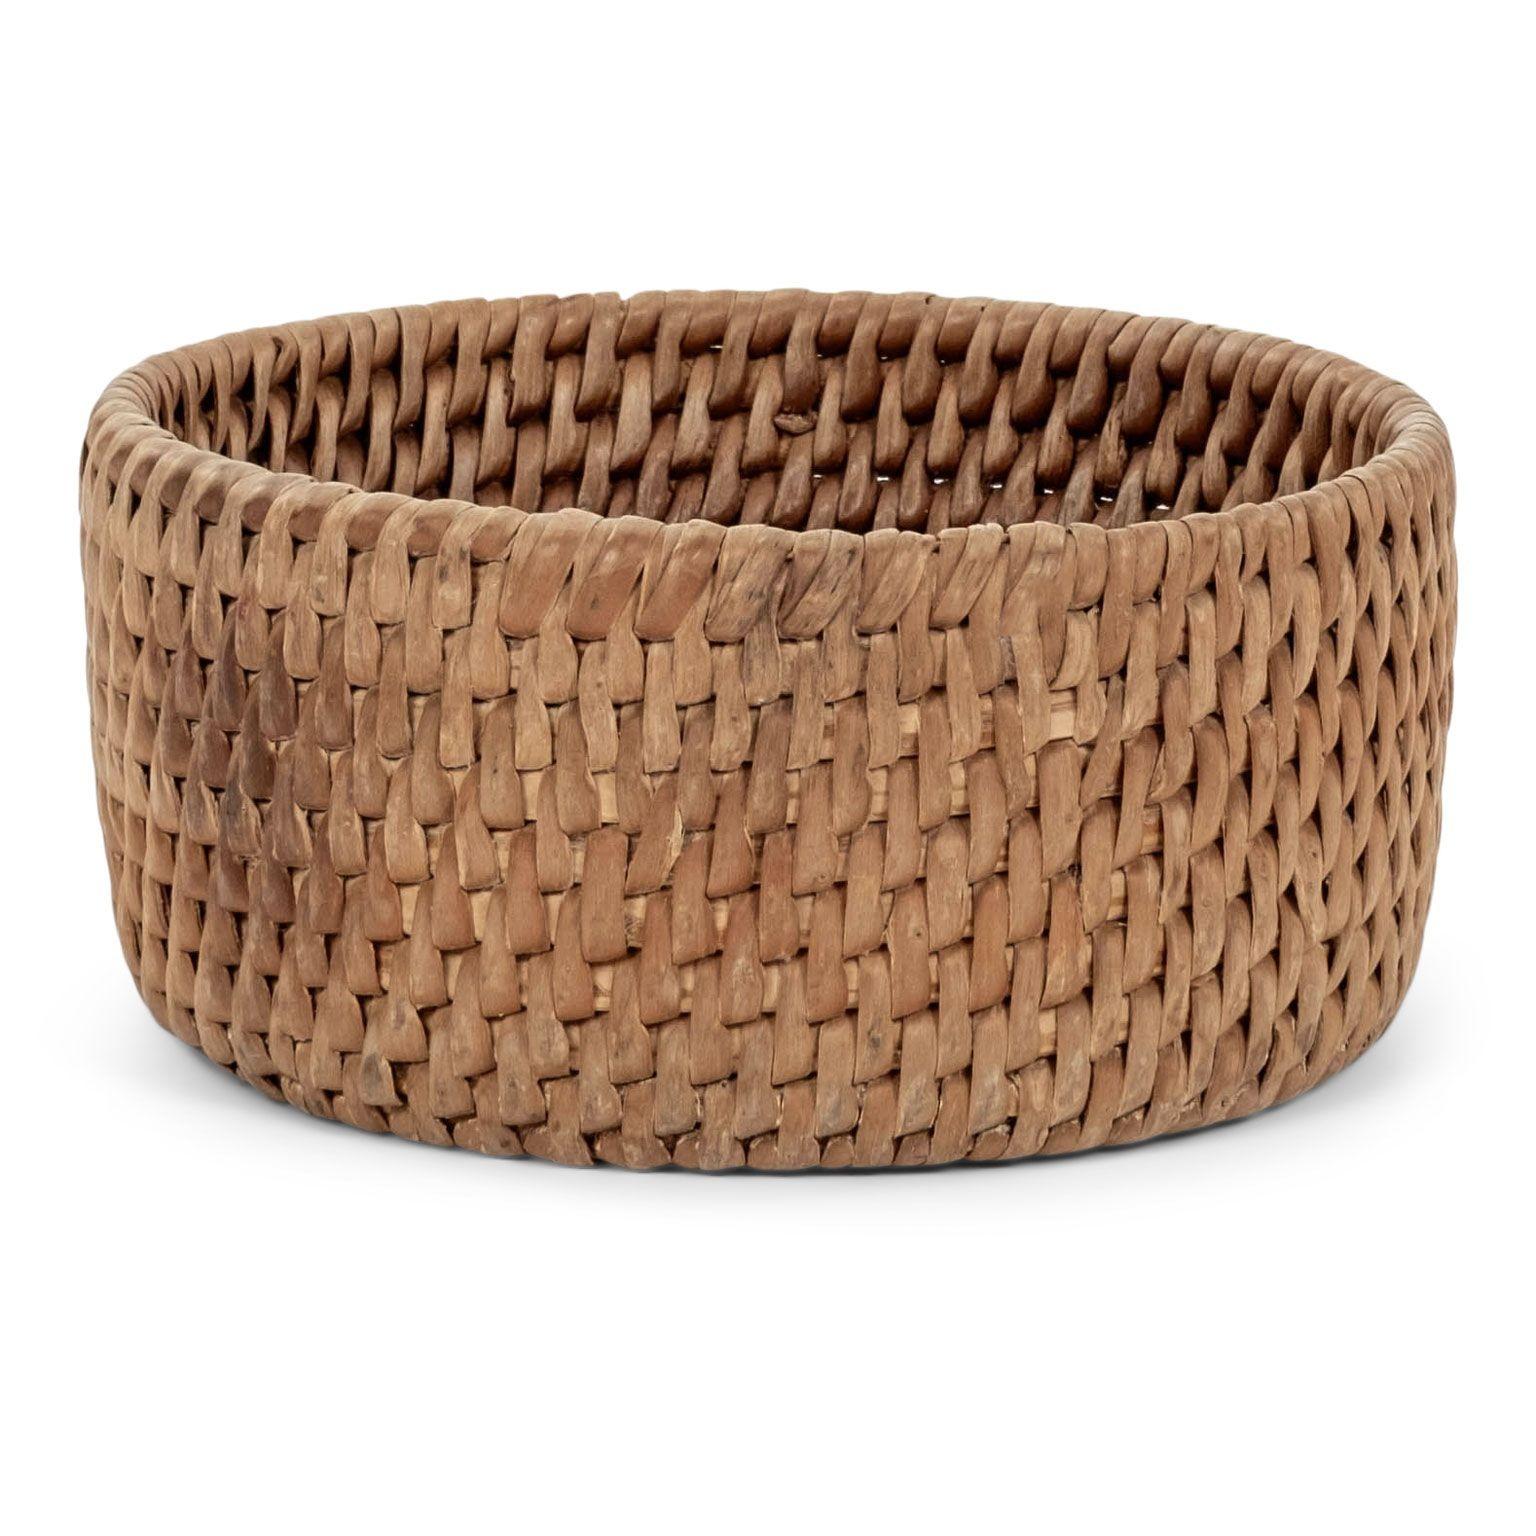 Hand-Woven Collection of Round Finely Woven-Birch Swedish Cheese Baskets For Sale